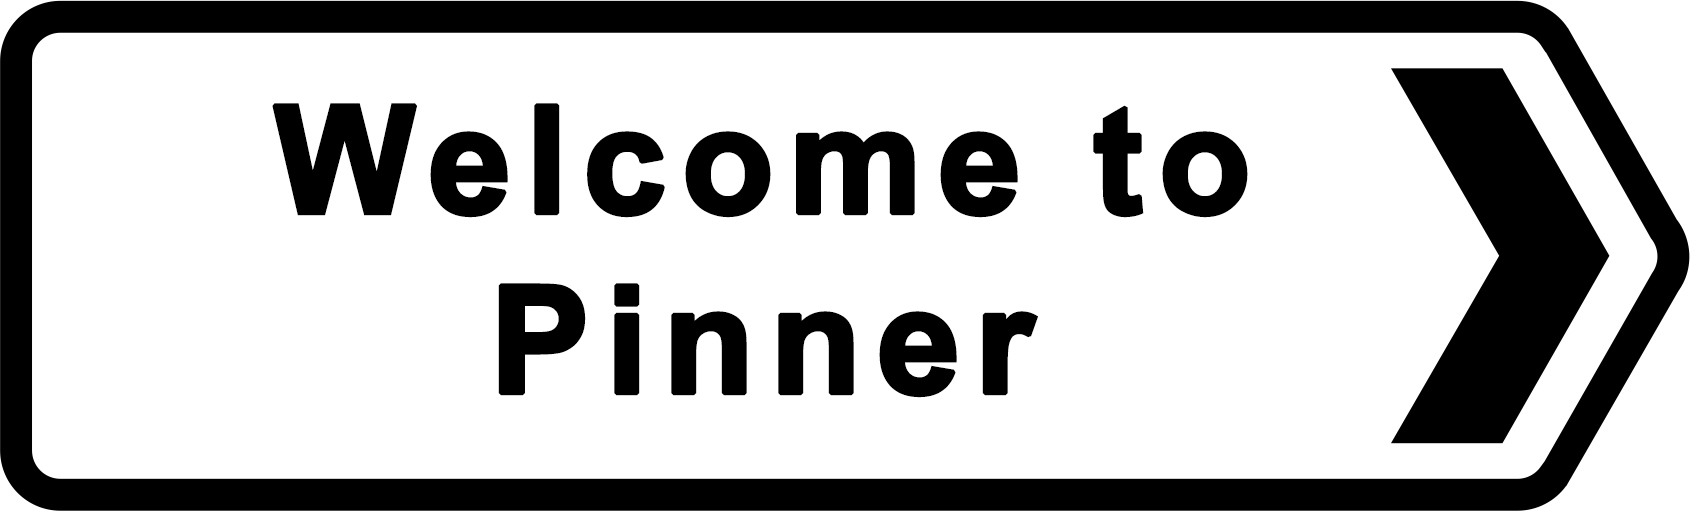 Welcome to Pinner - Cheap Driving Schools Lessons in Pinner, HA5, London borough of Harrow, Greater London